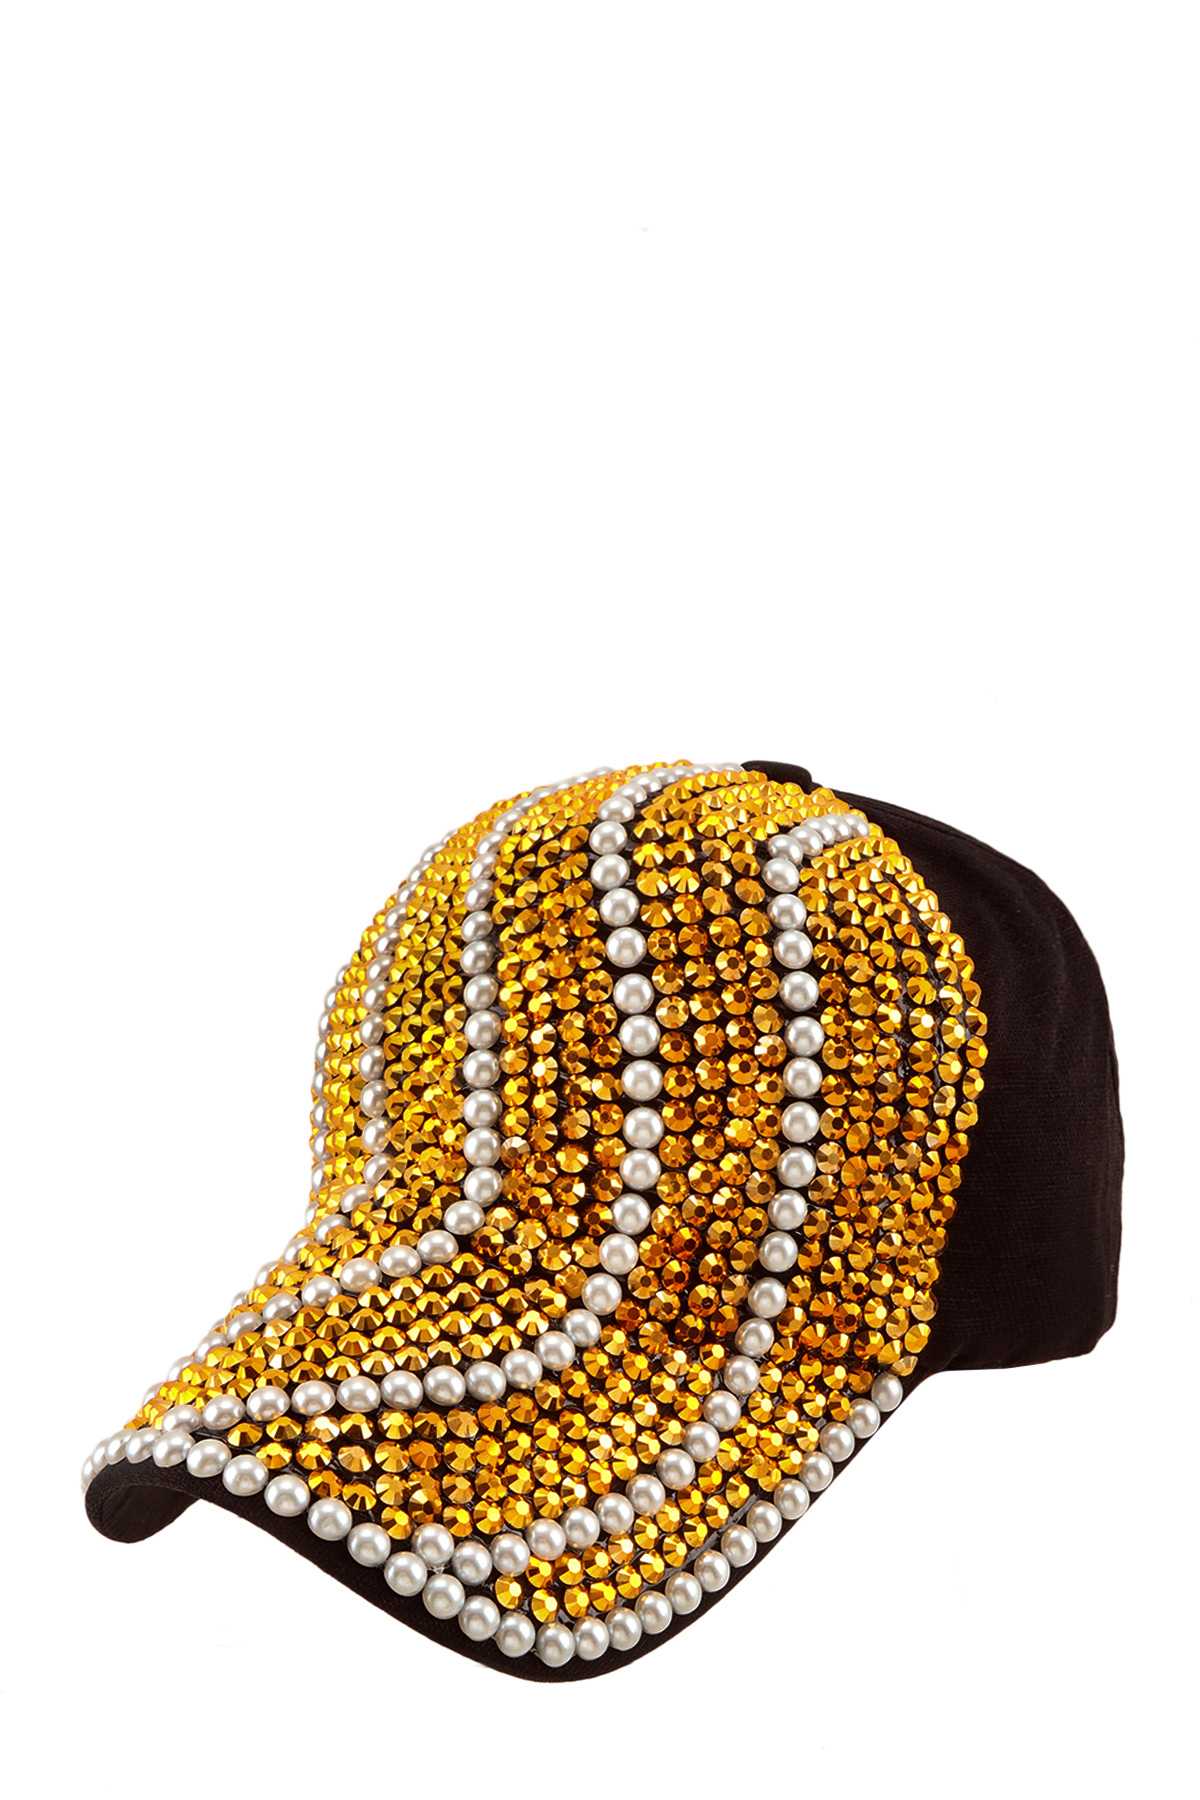 Baseball Cap with Stones and Pearl Accent